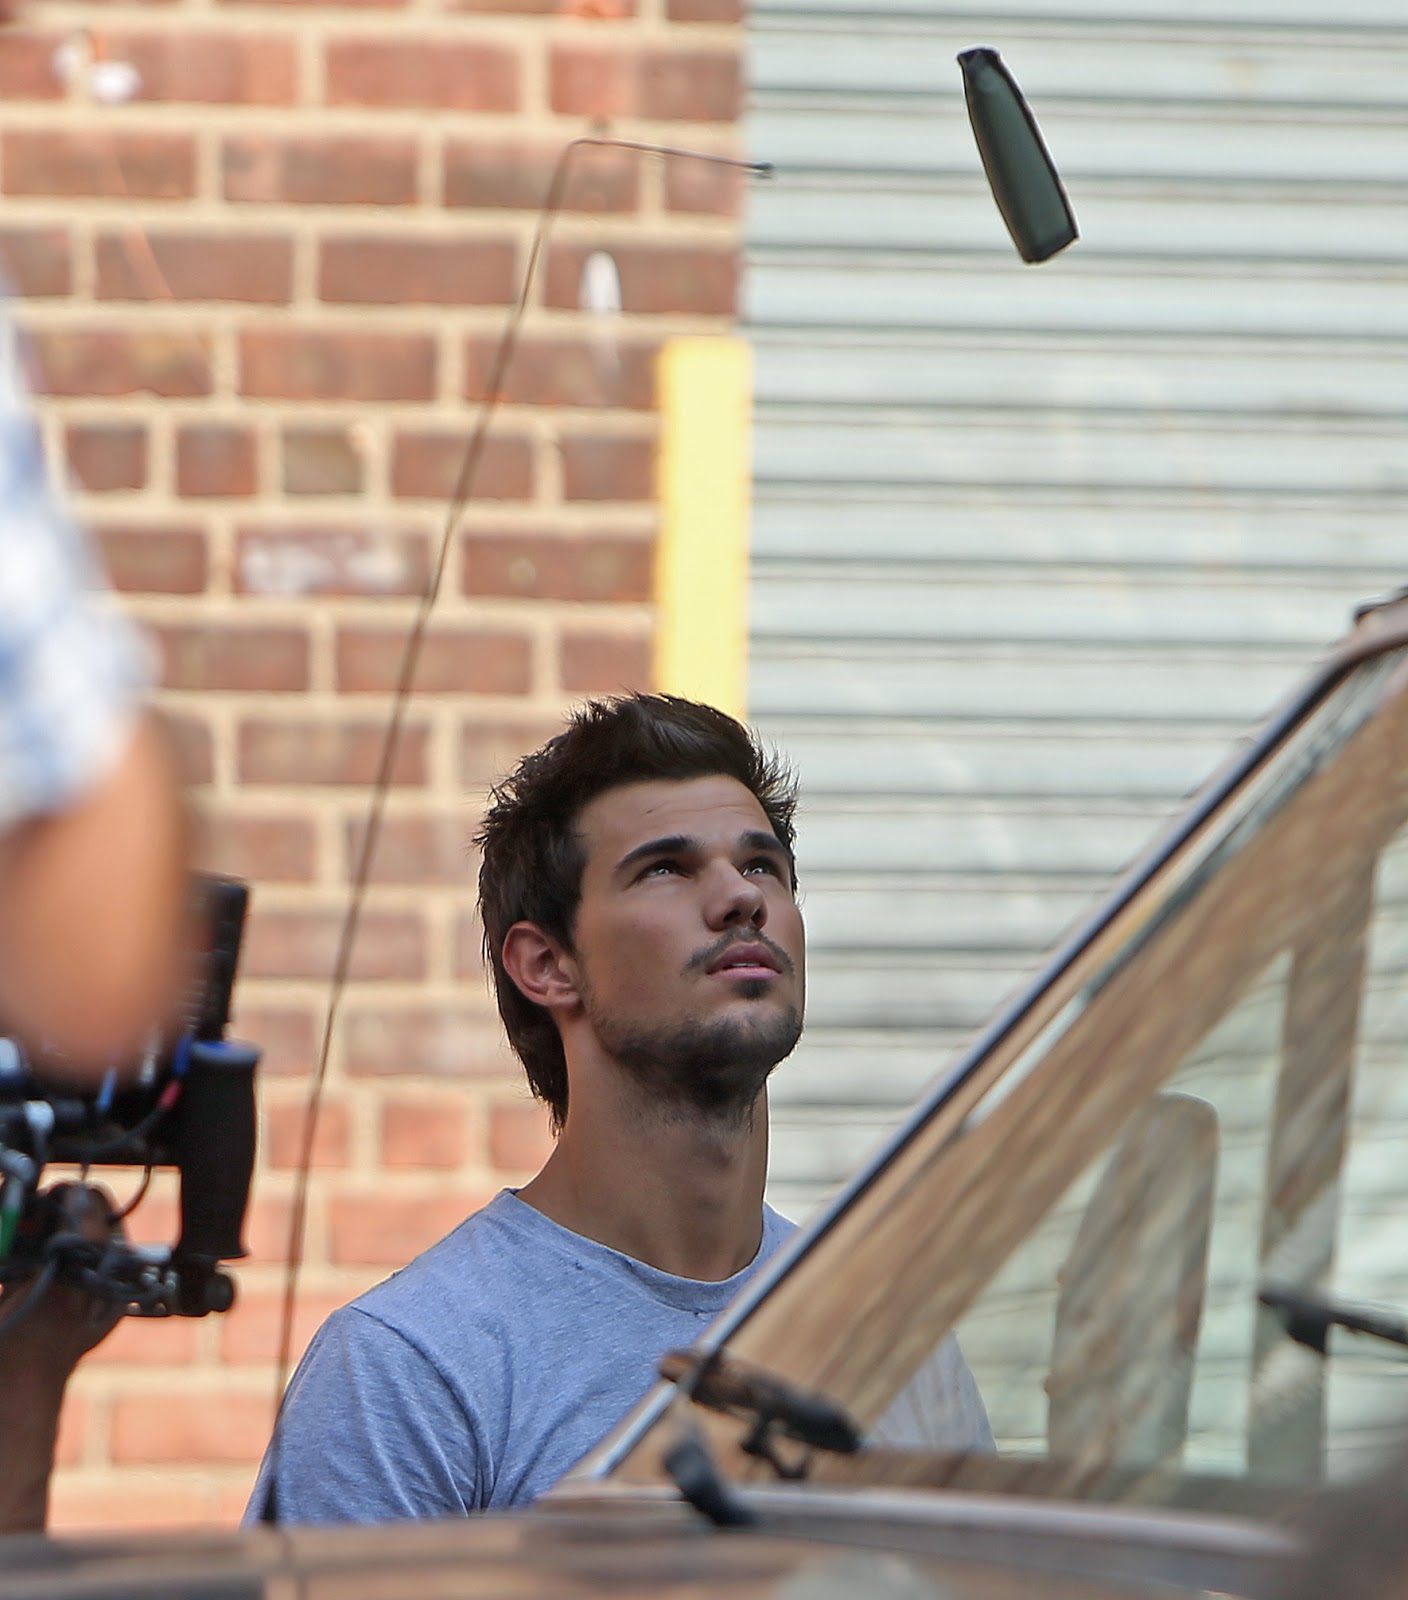 OFFICIAL TAYLOR LAUTNER FAN PAGE: Old/New Taylor in Manila 